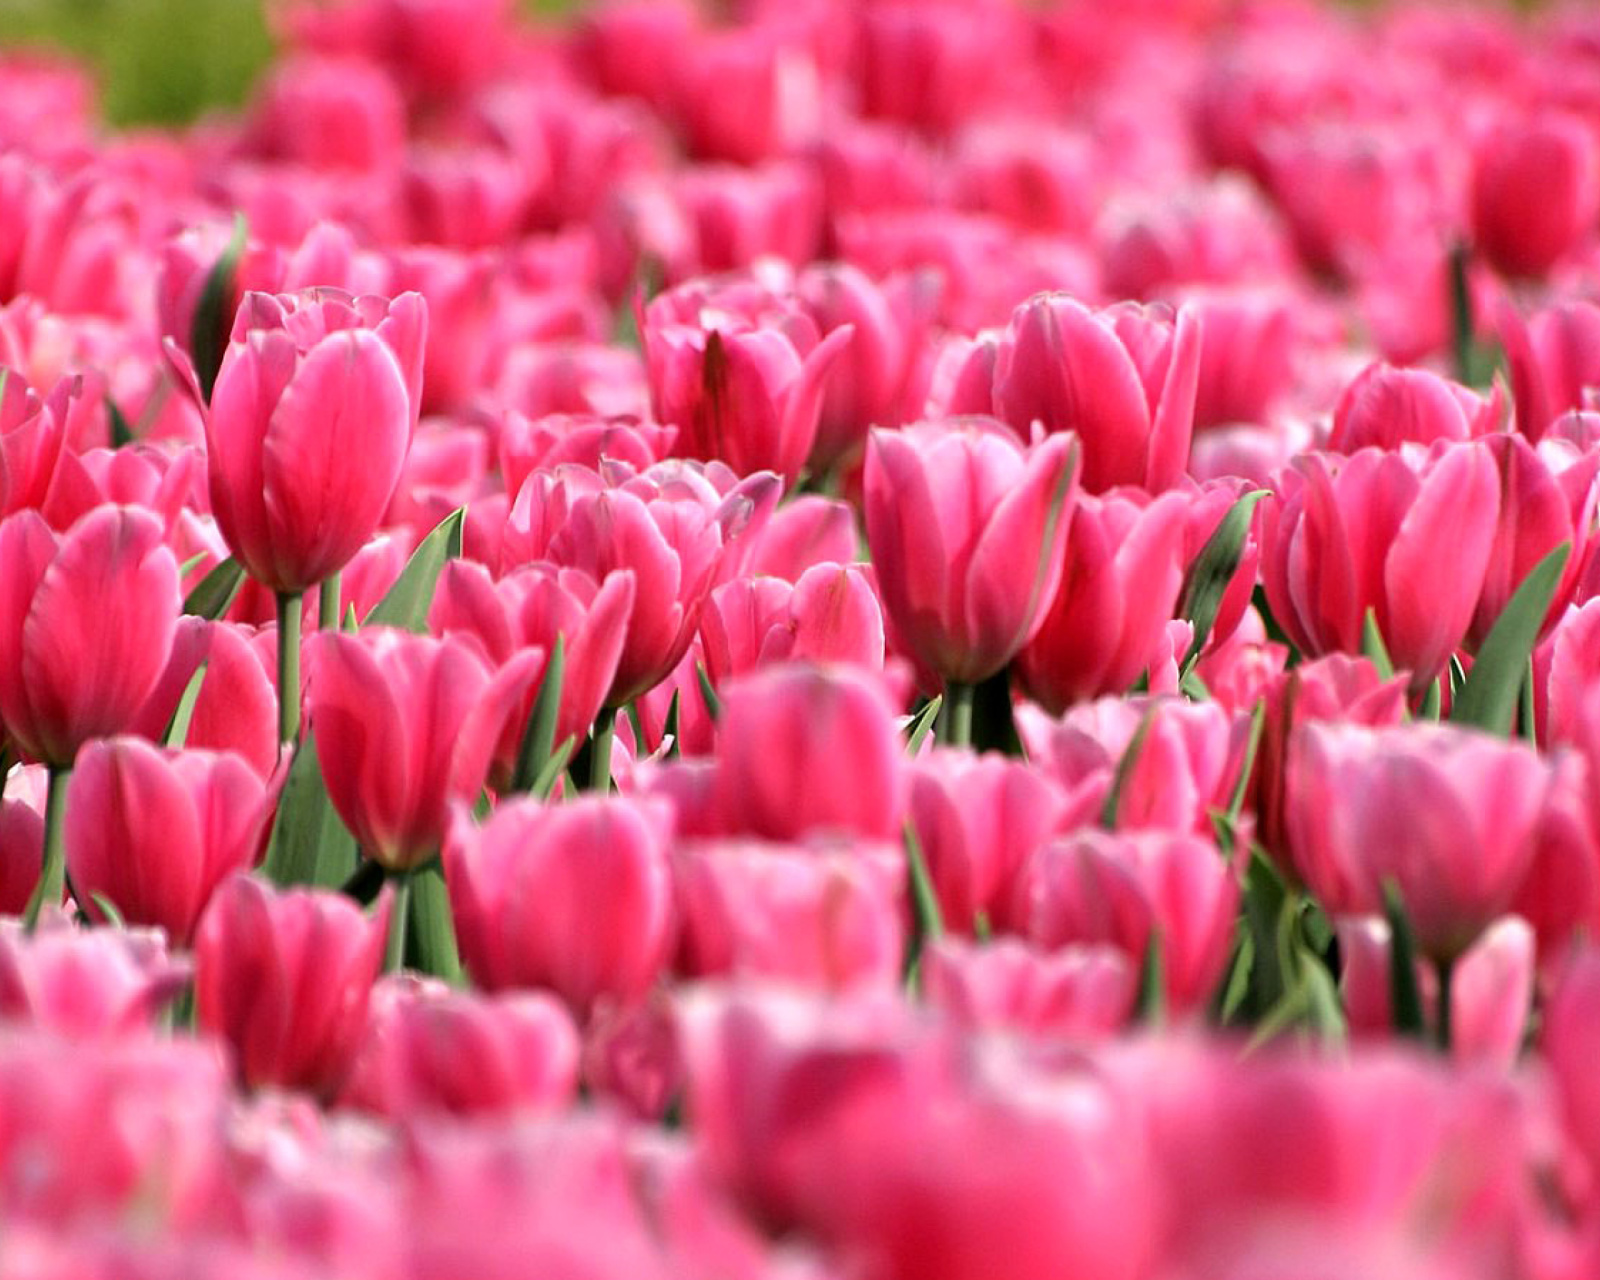 Pink Tulips in Holland Festival wallpaper 1600x1280